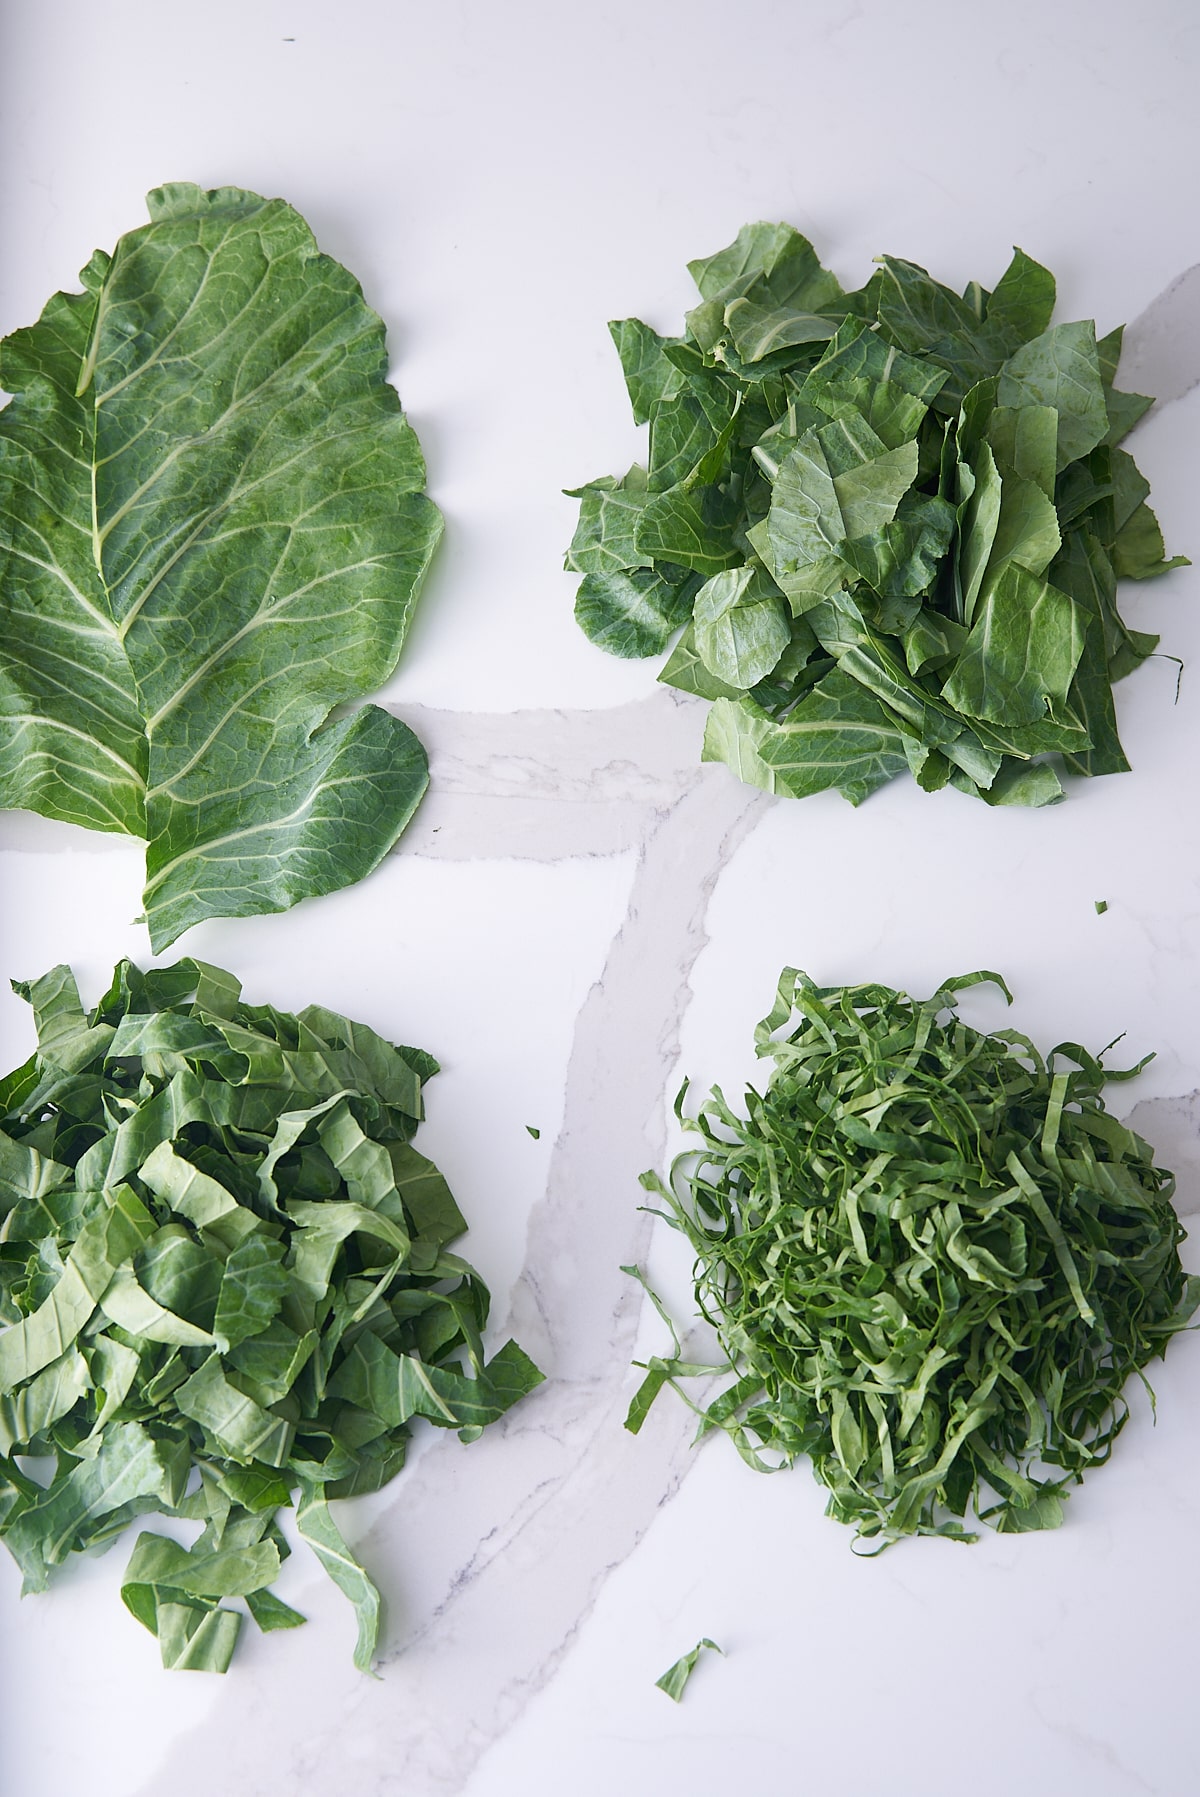 collard greens on white marble countertop. whole leaves, chopped leaves, and sliced leaves